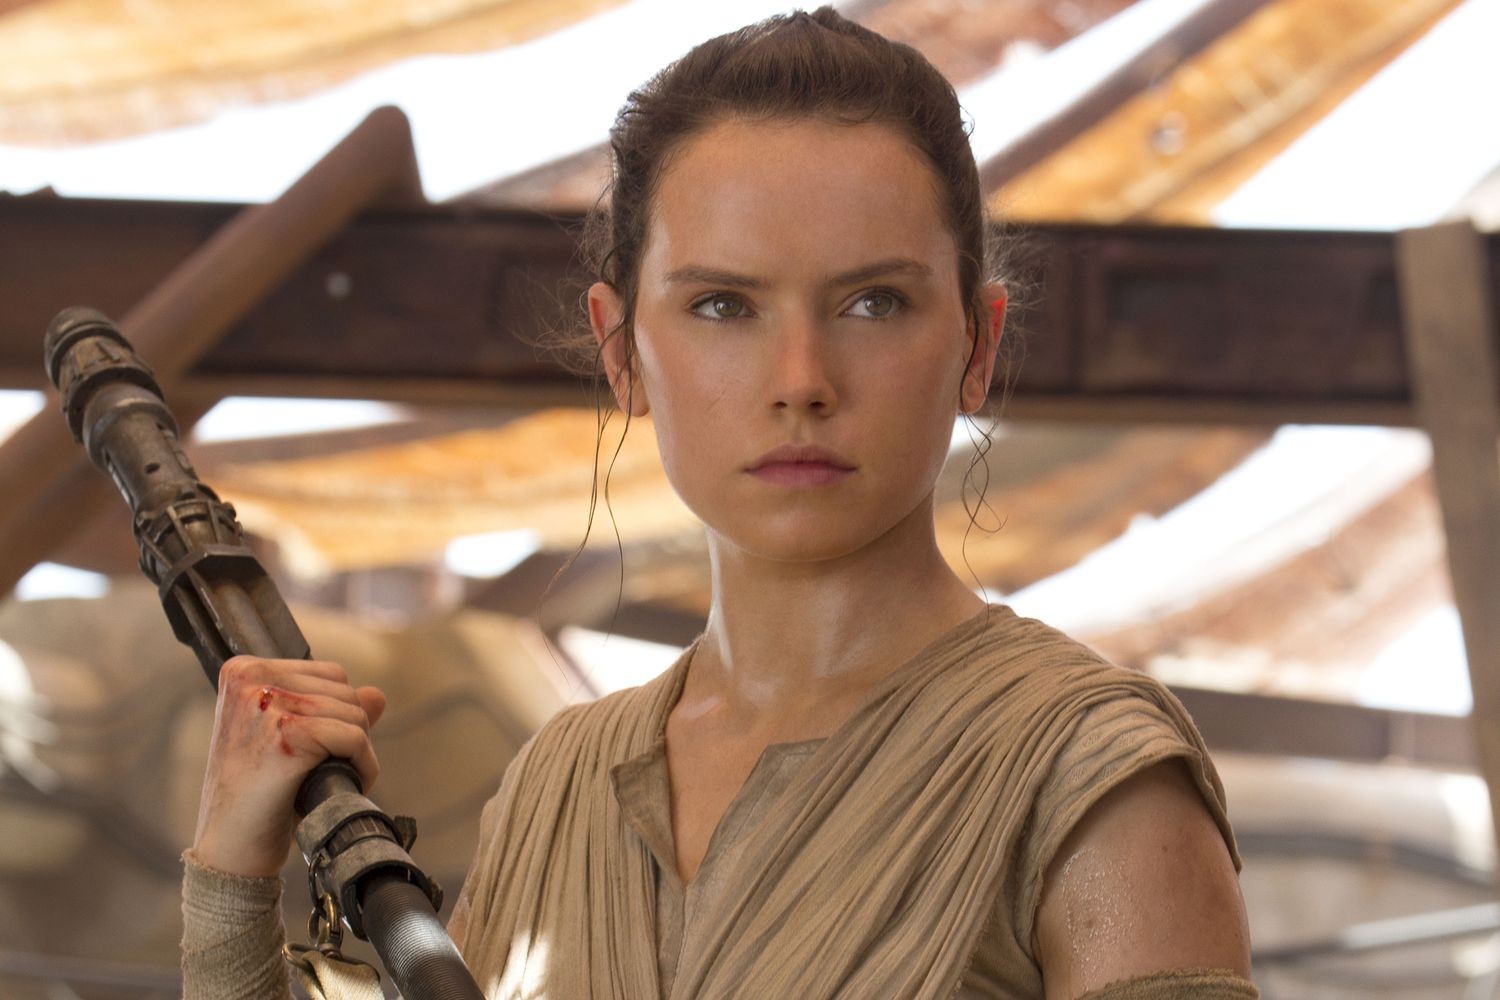 Daisy Ridley made her debut as Rey in 2015's Star Wars: The Force Awakens